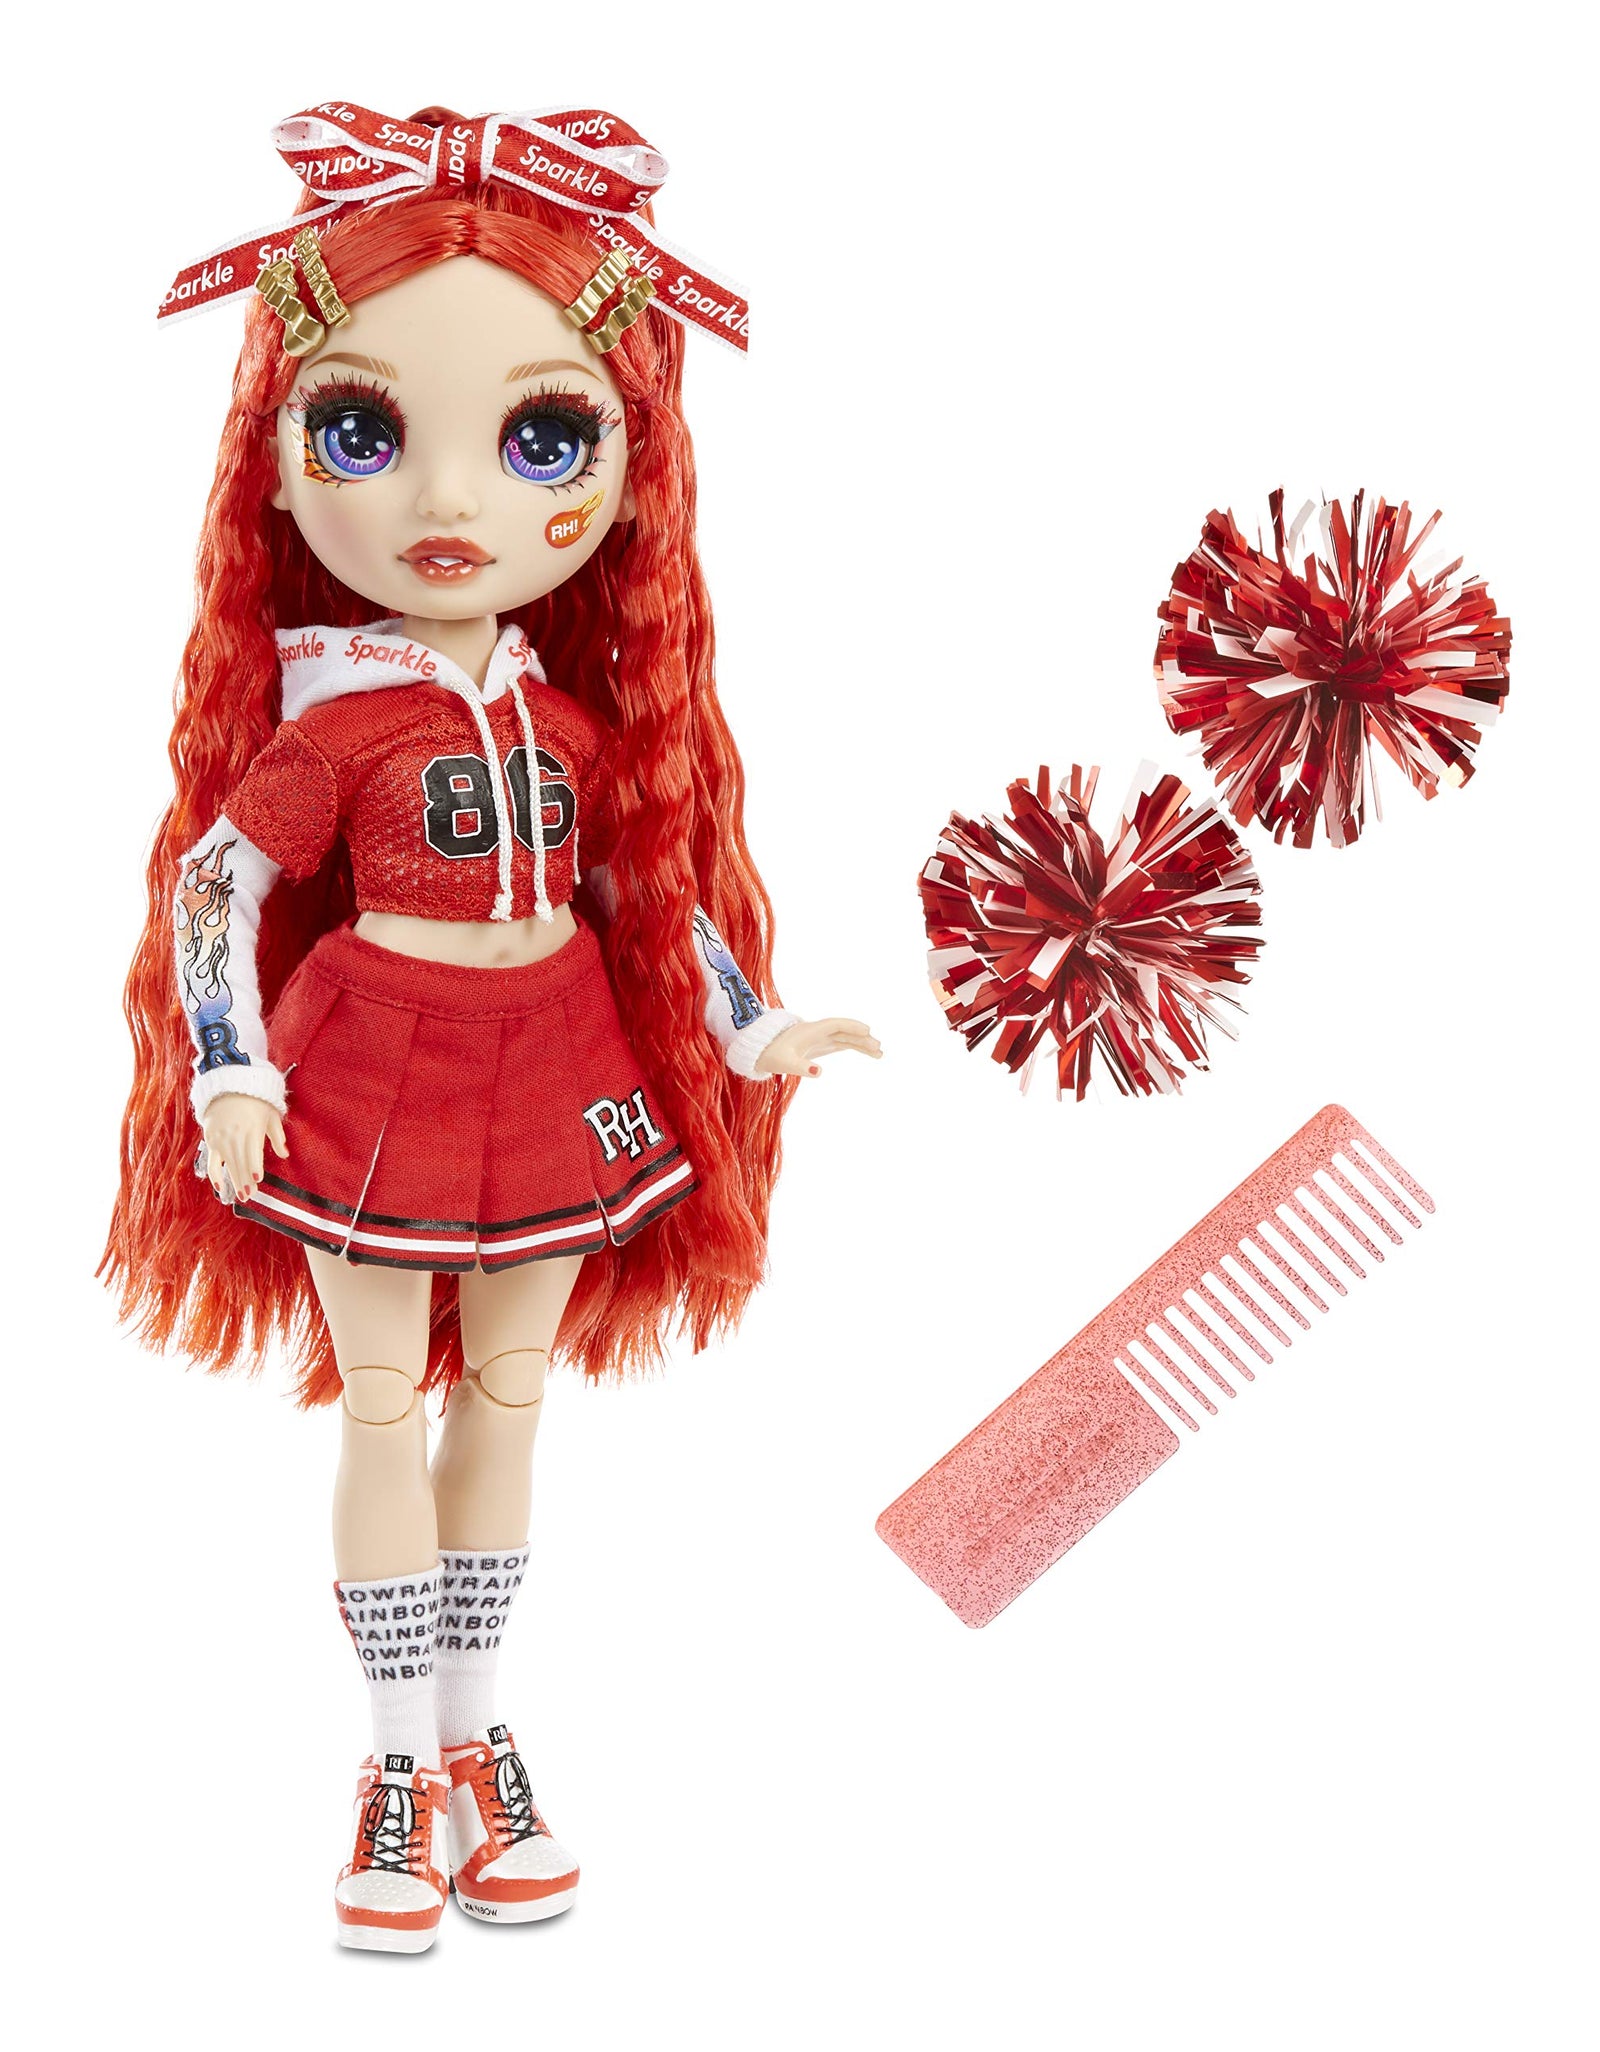 Rainbow High Cheer Ruby Anderson – Red Cheerleader Fashion Doll with 2 Pom Poms and Doll Accessories, Great Gift for Kids 6-12 Years Old